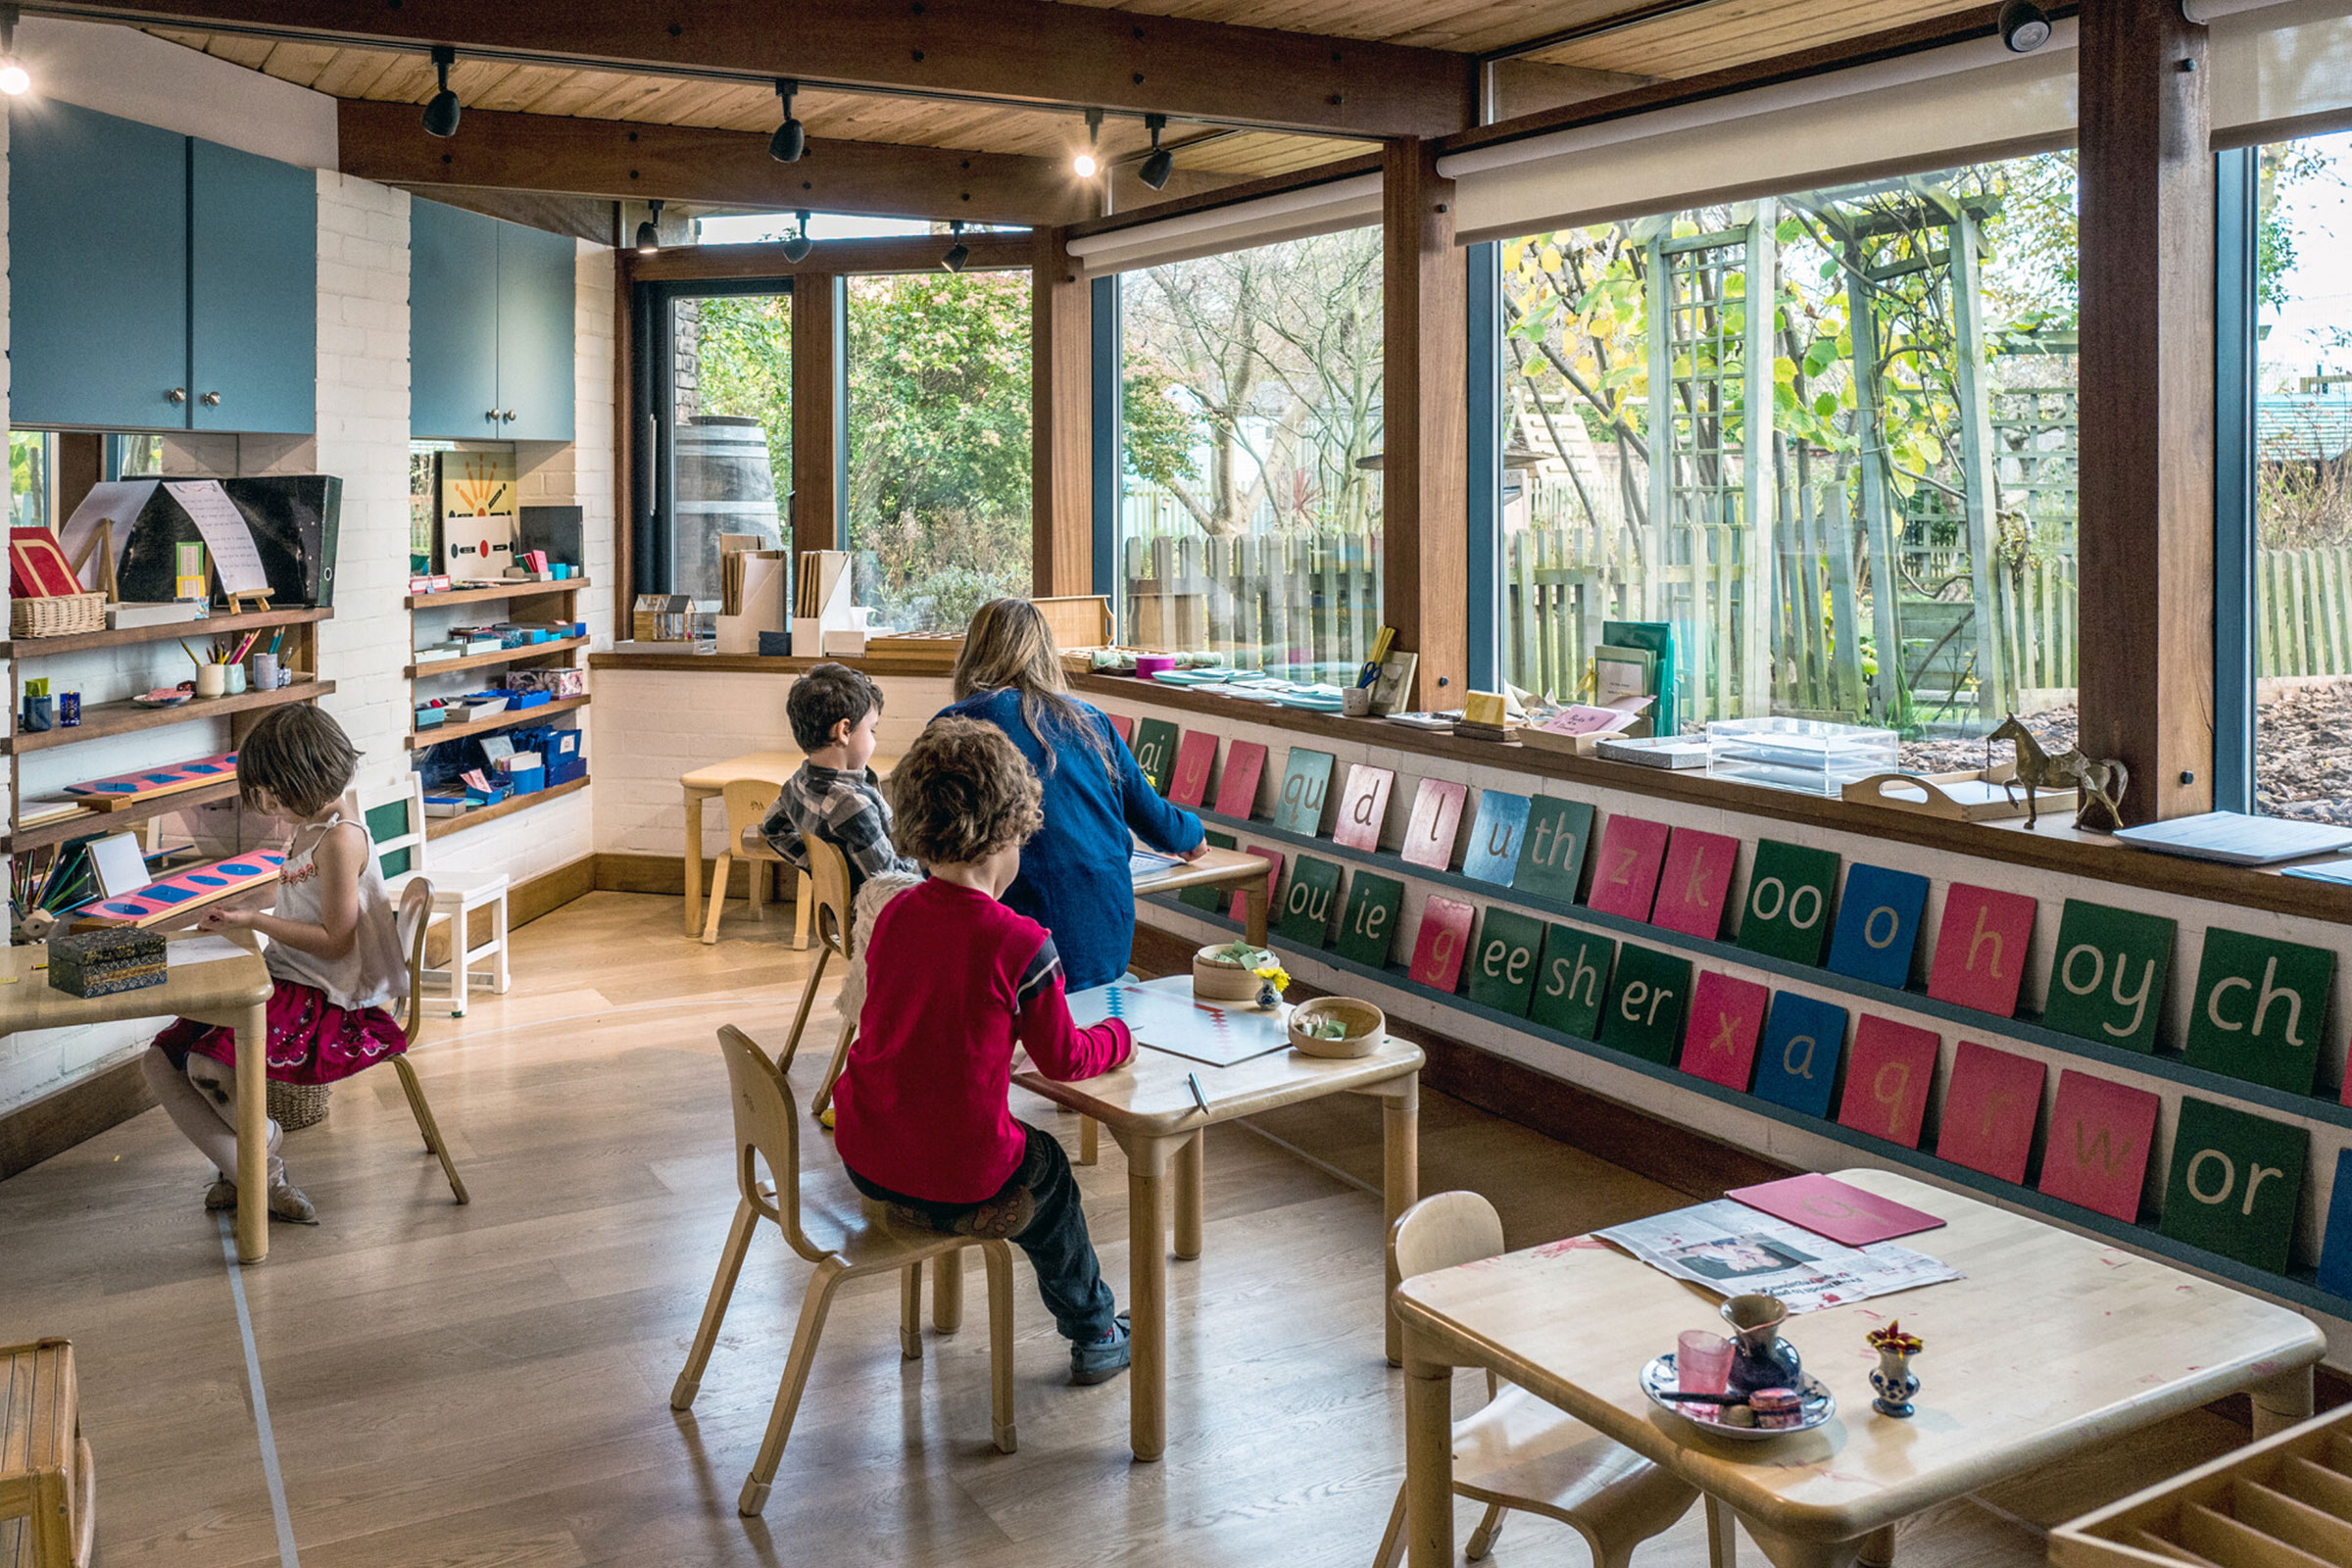 The Features of a Montessori School